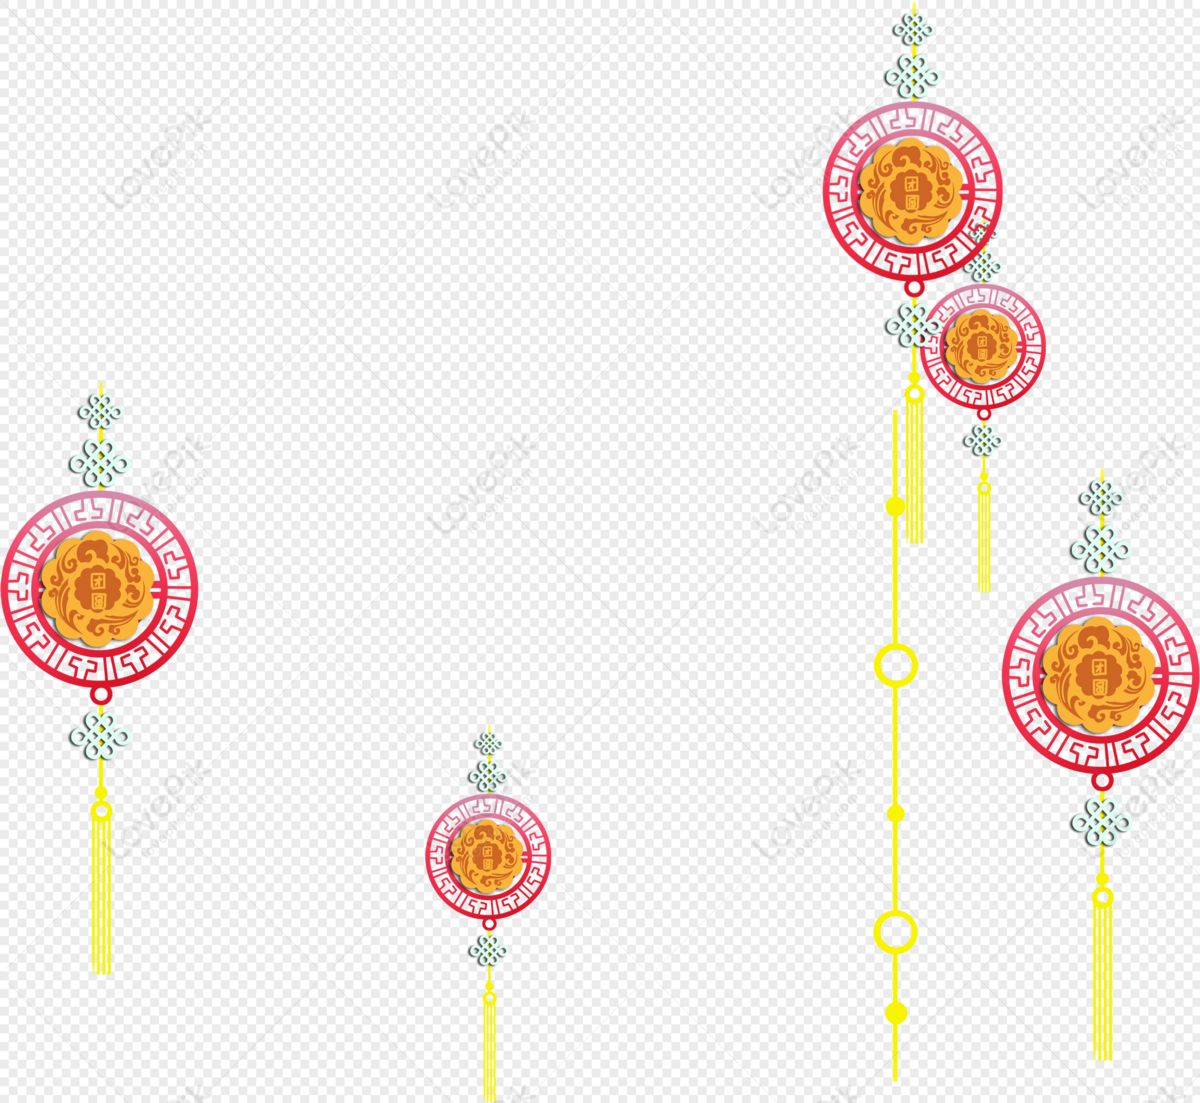 Traditional Decoration PNG Image Free Download And Clipart Image For Free  Download - Lovepik | 400543651